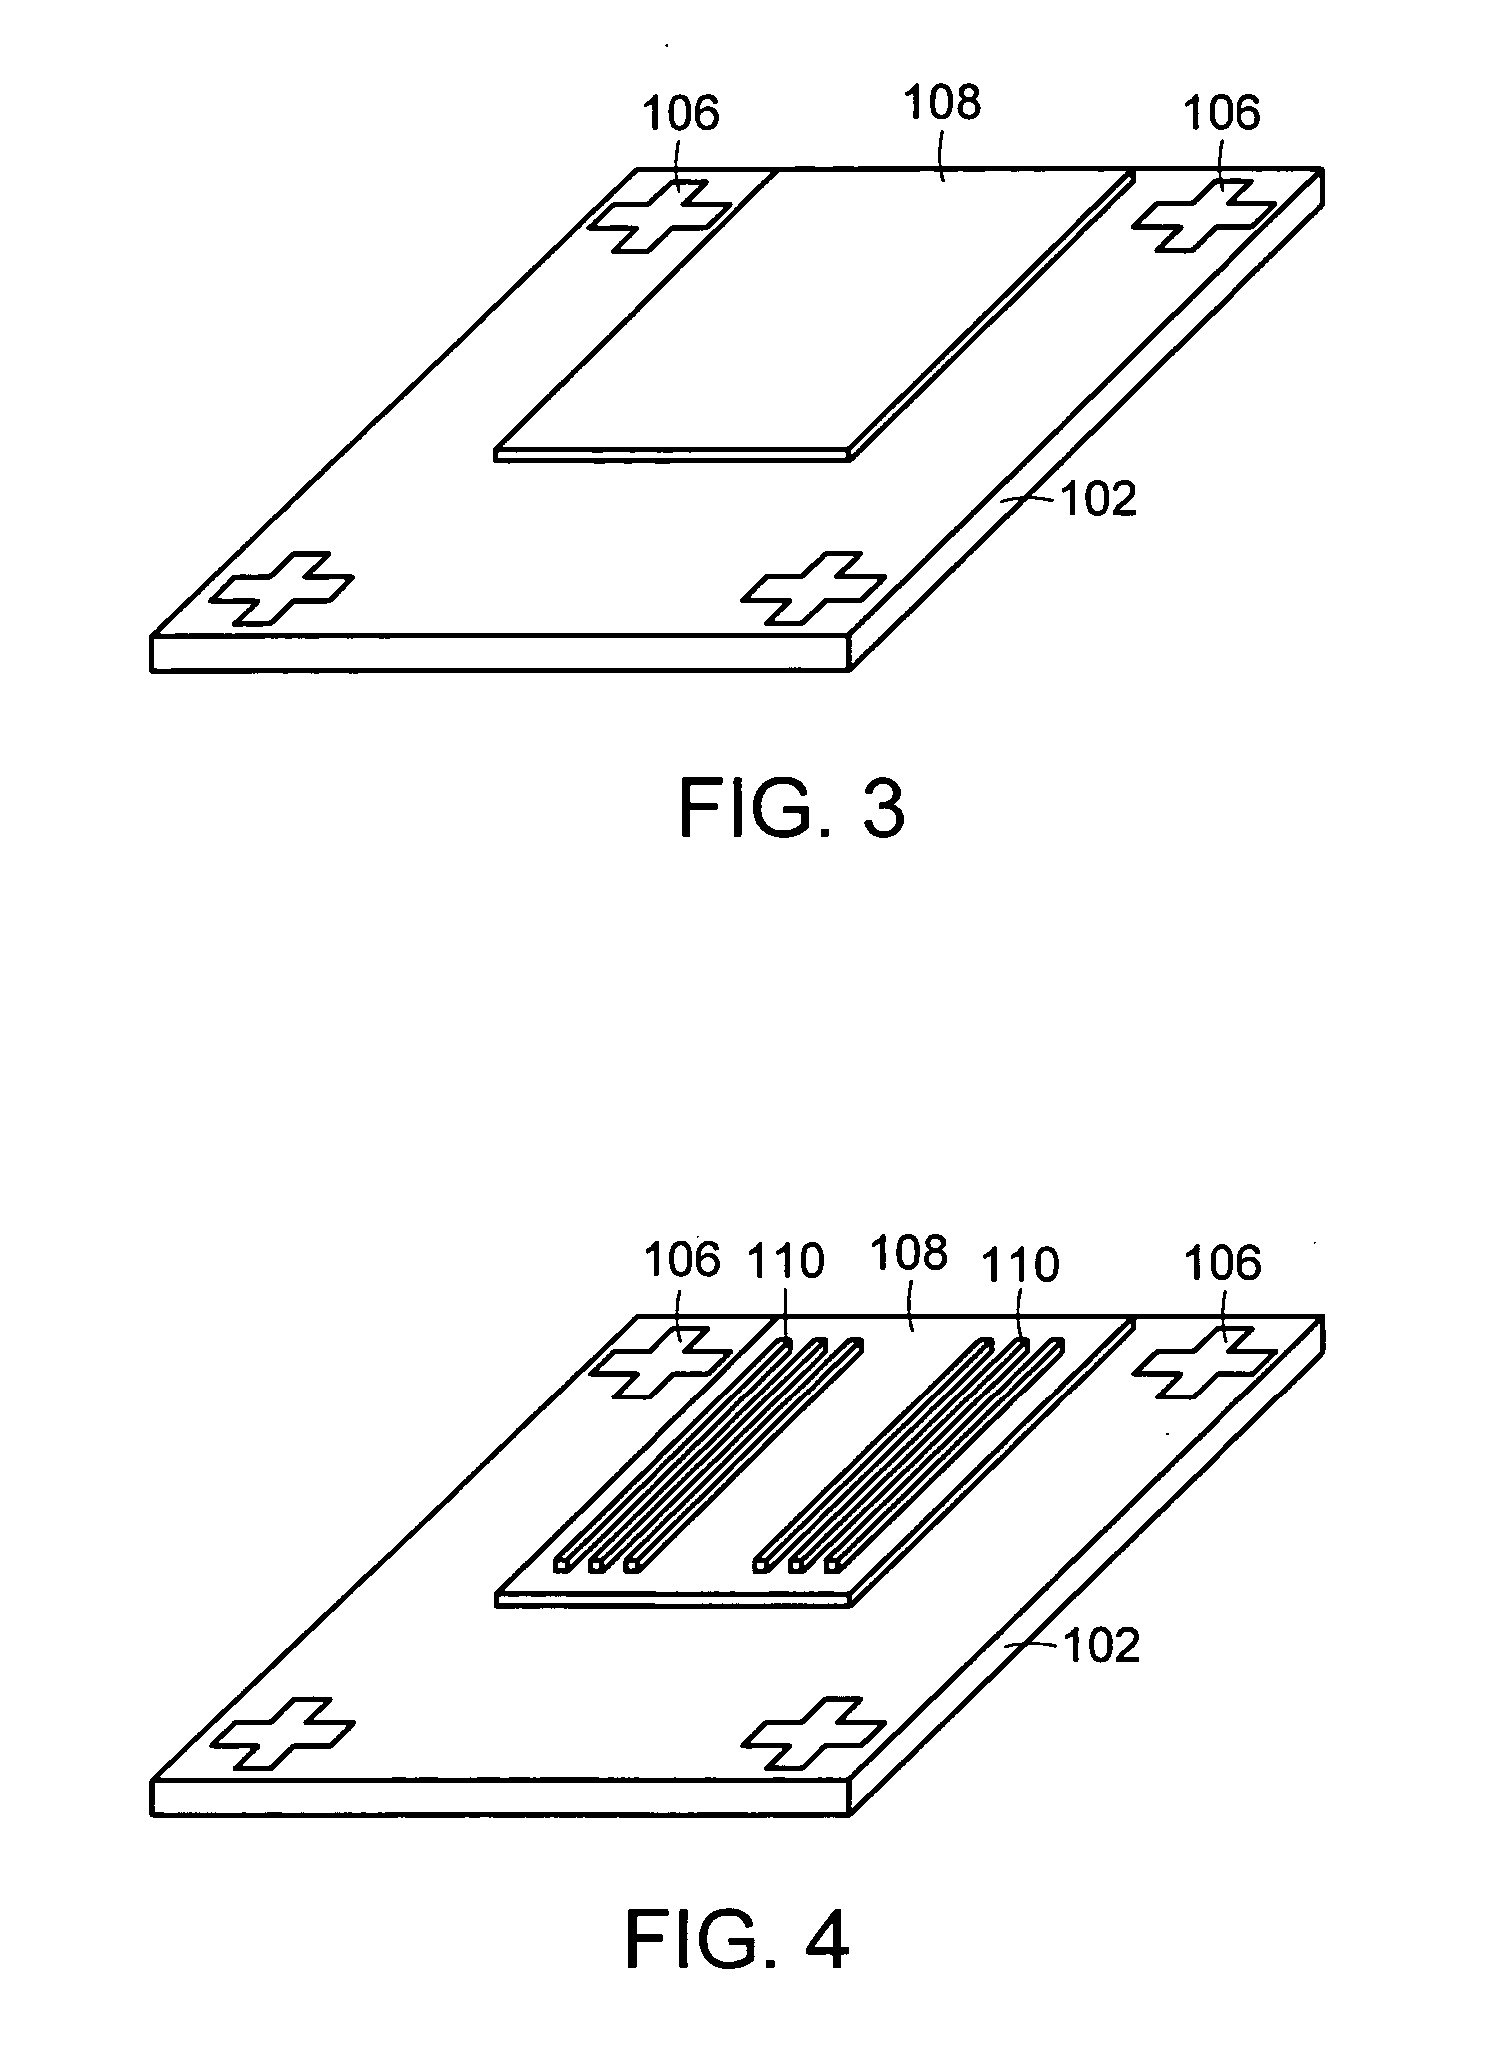 Optical interface assembly and method of formation